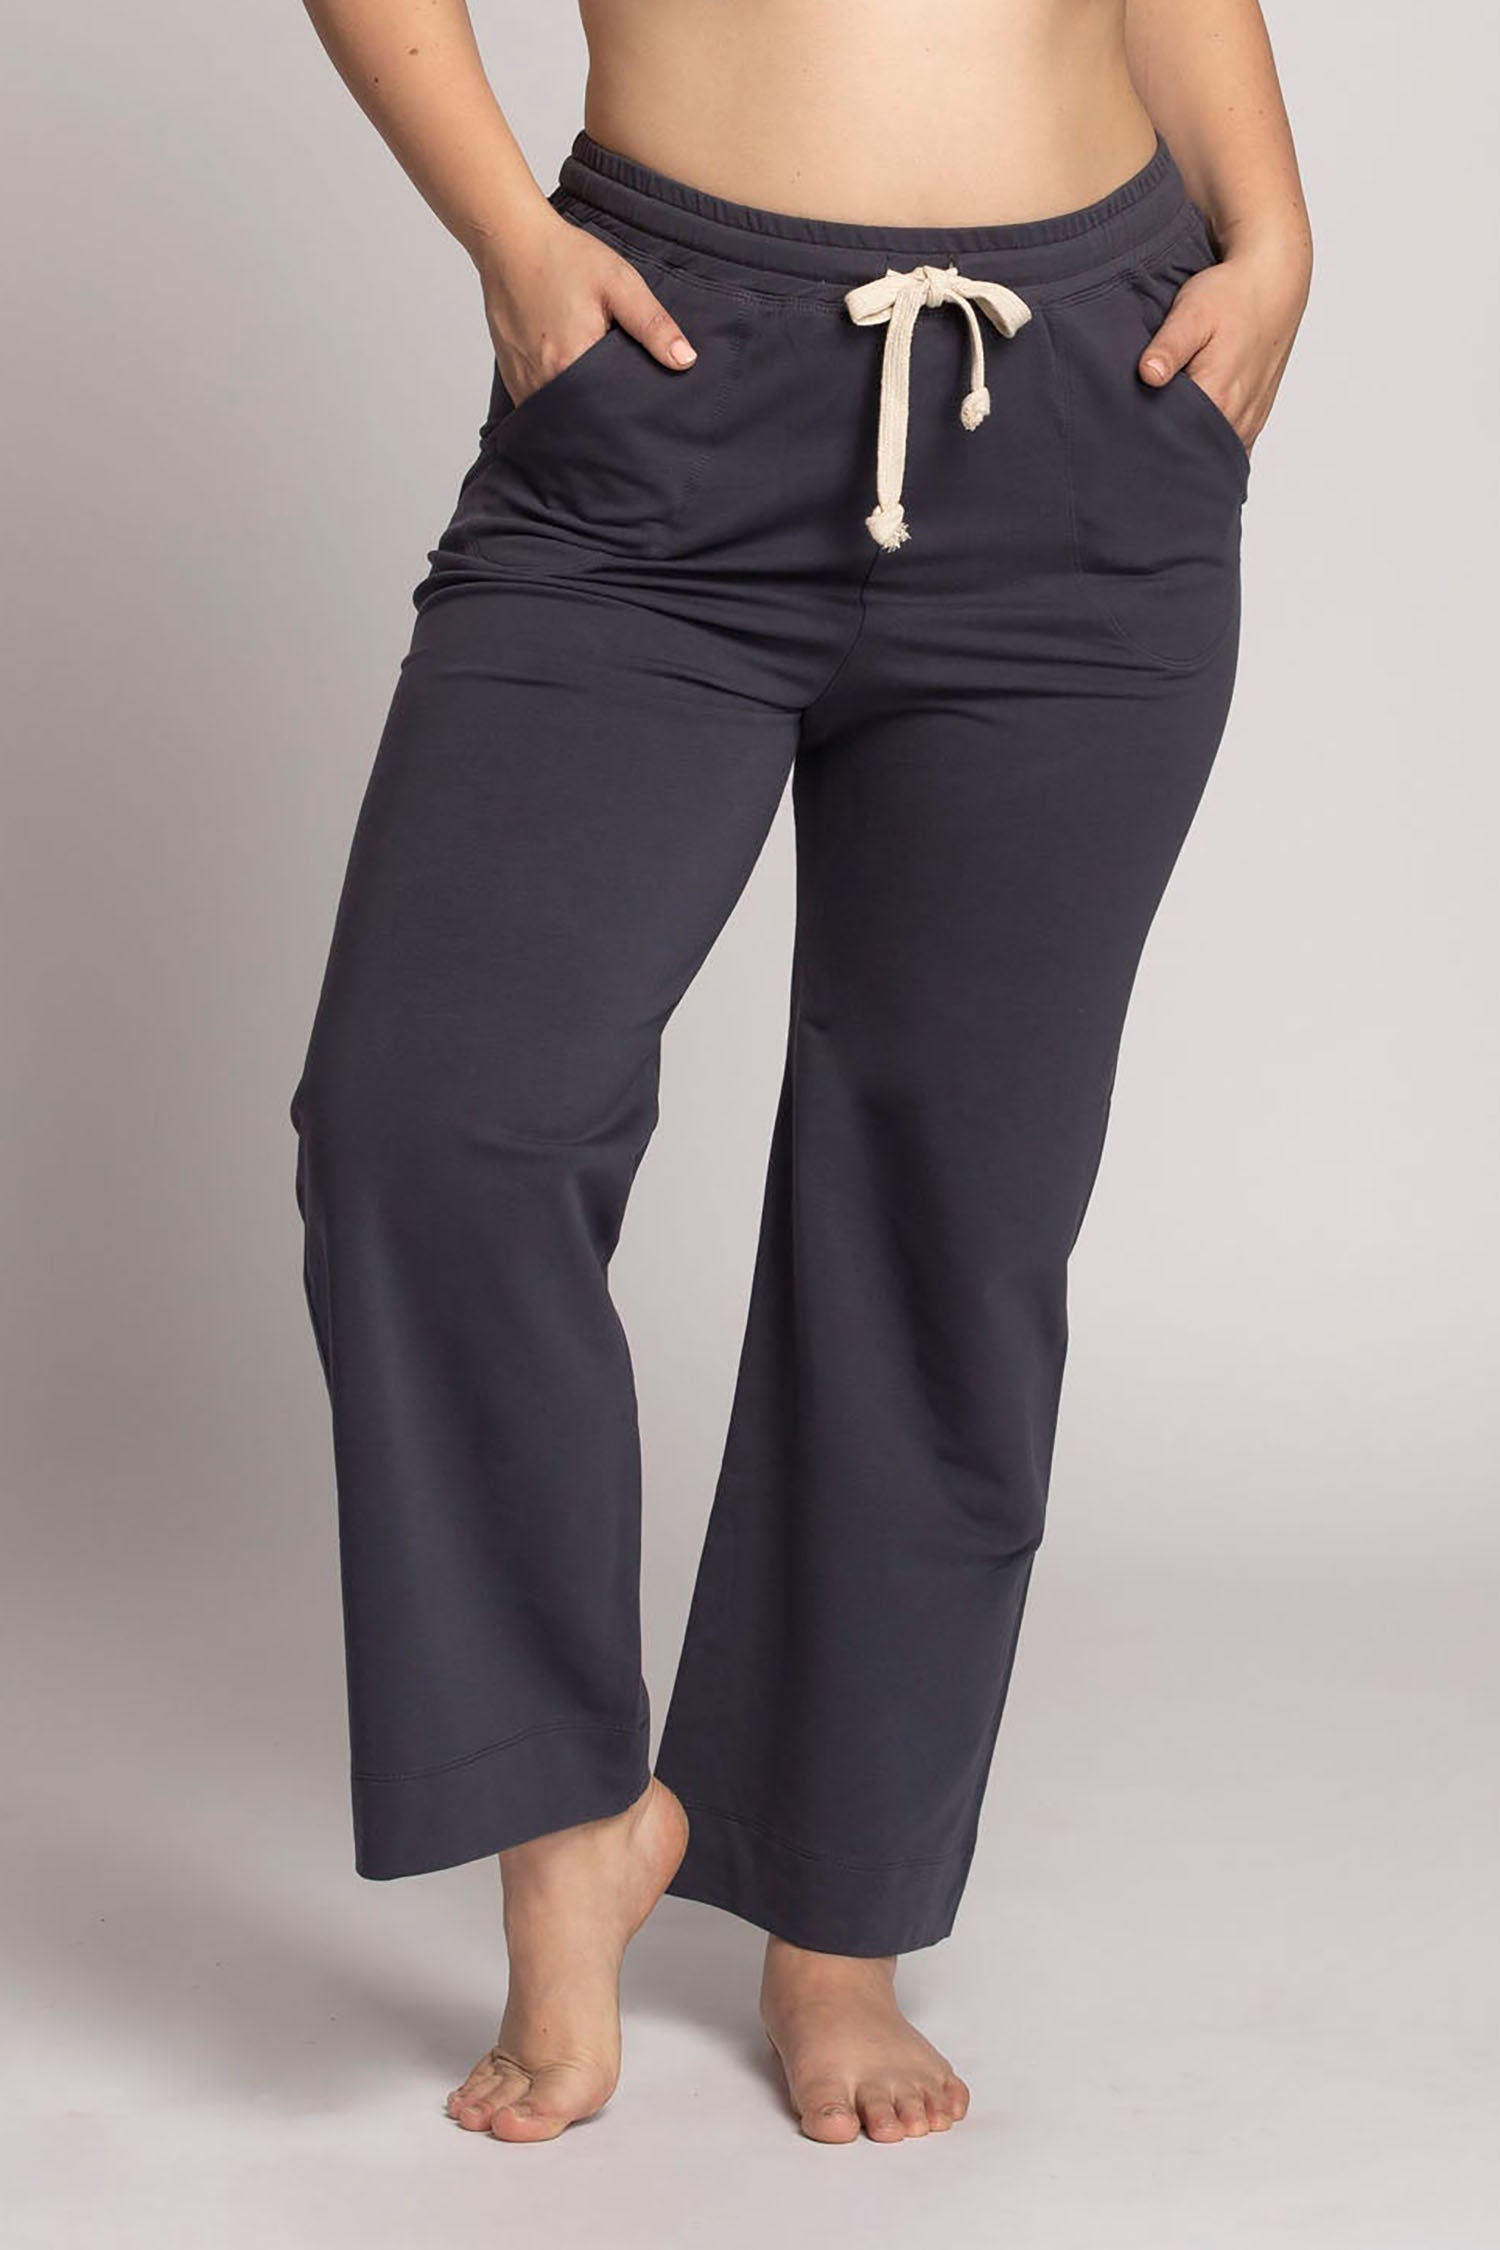 Cozy Terry Lounge Pants  Casual chic, Ambiance apparel, Lounge pants